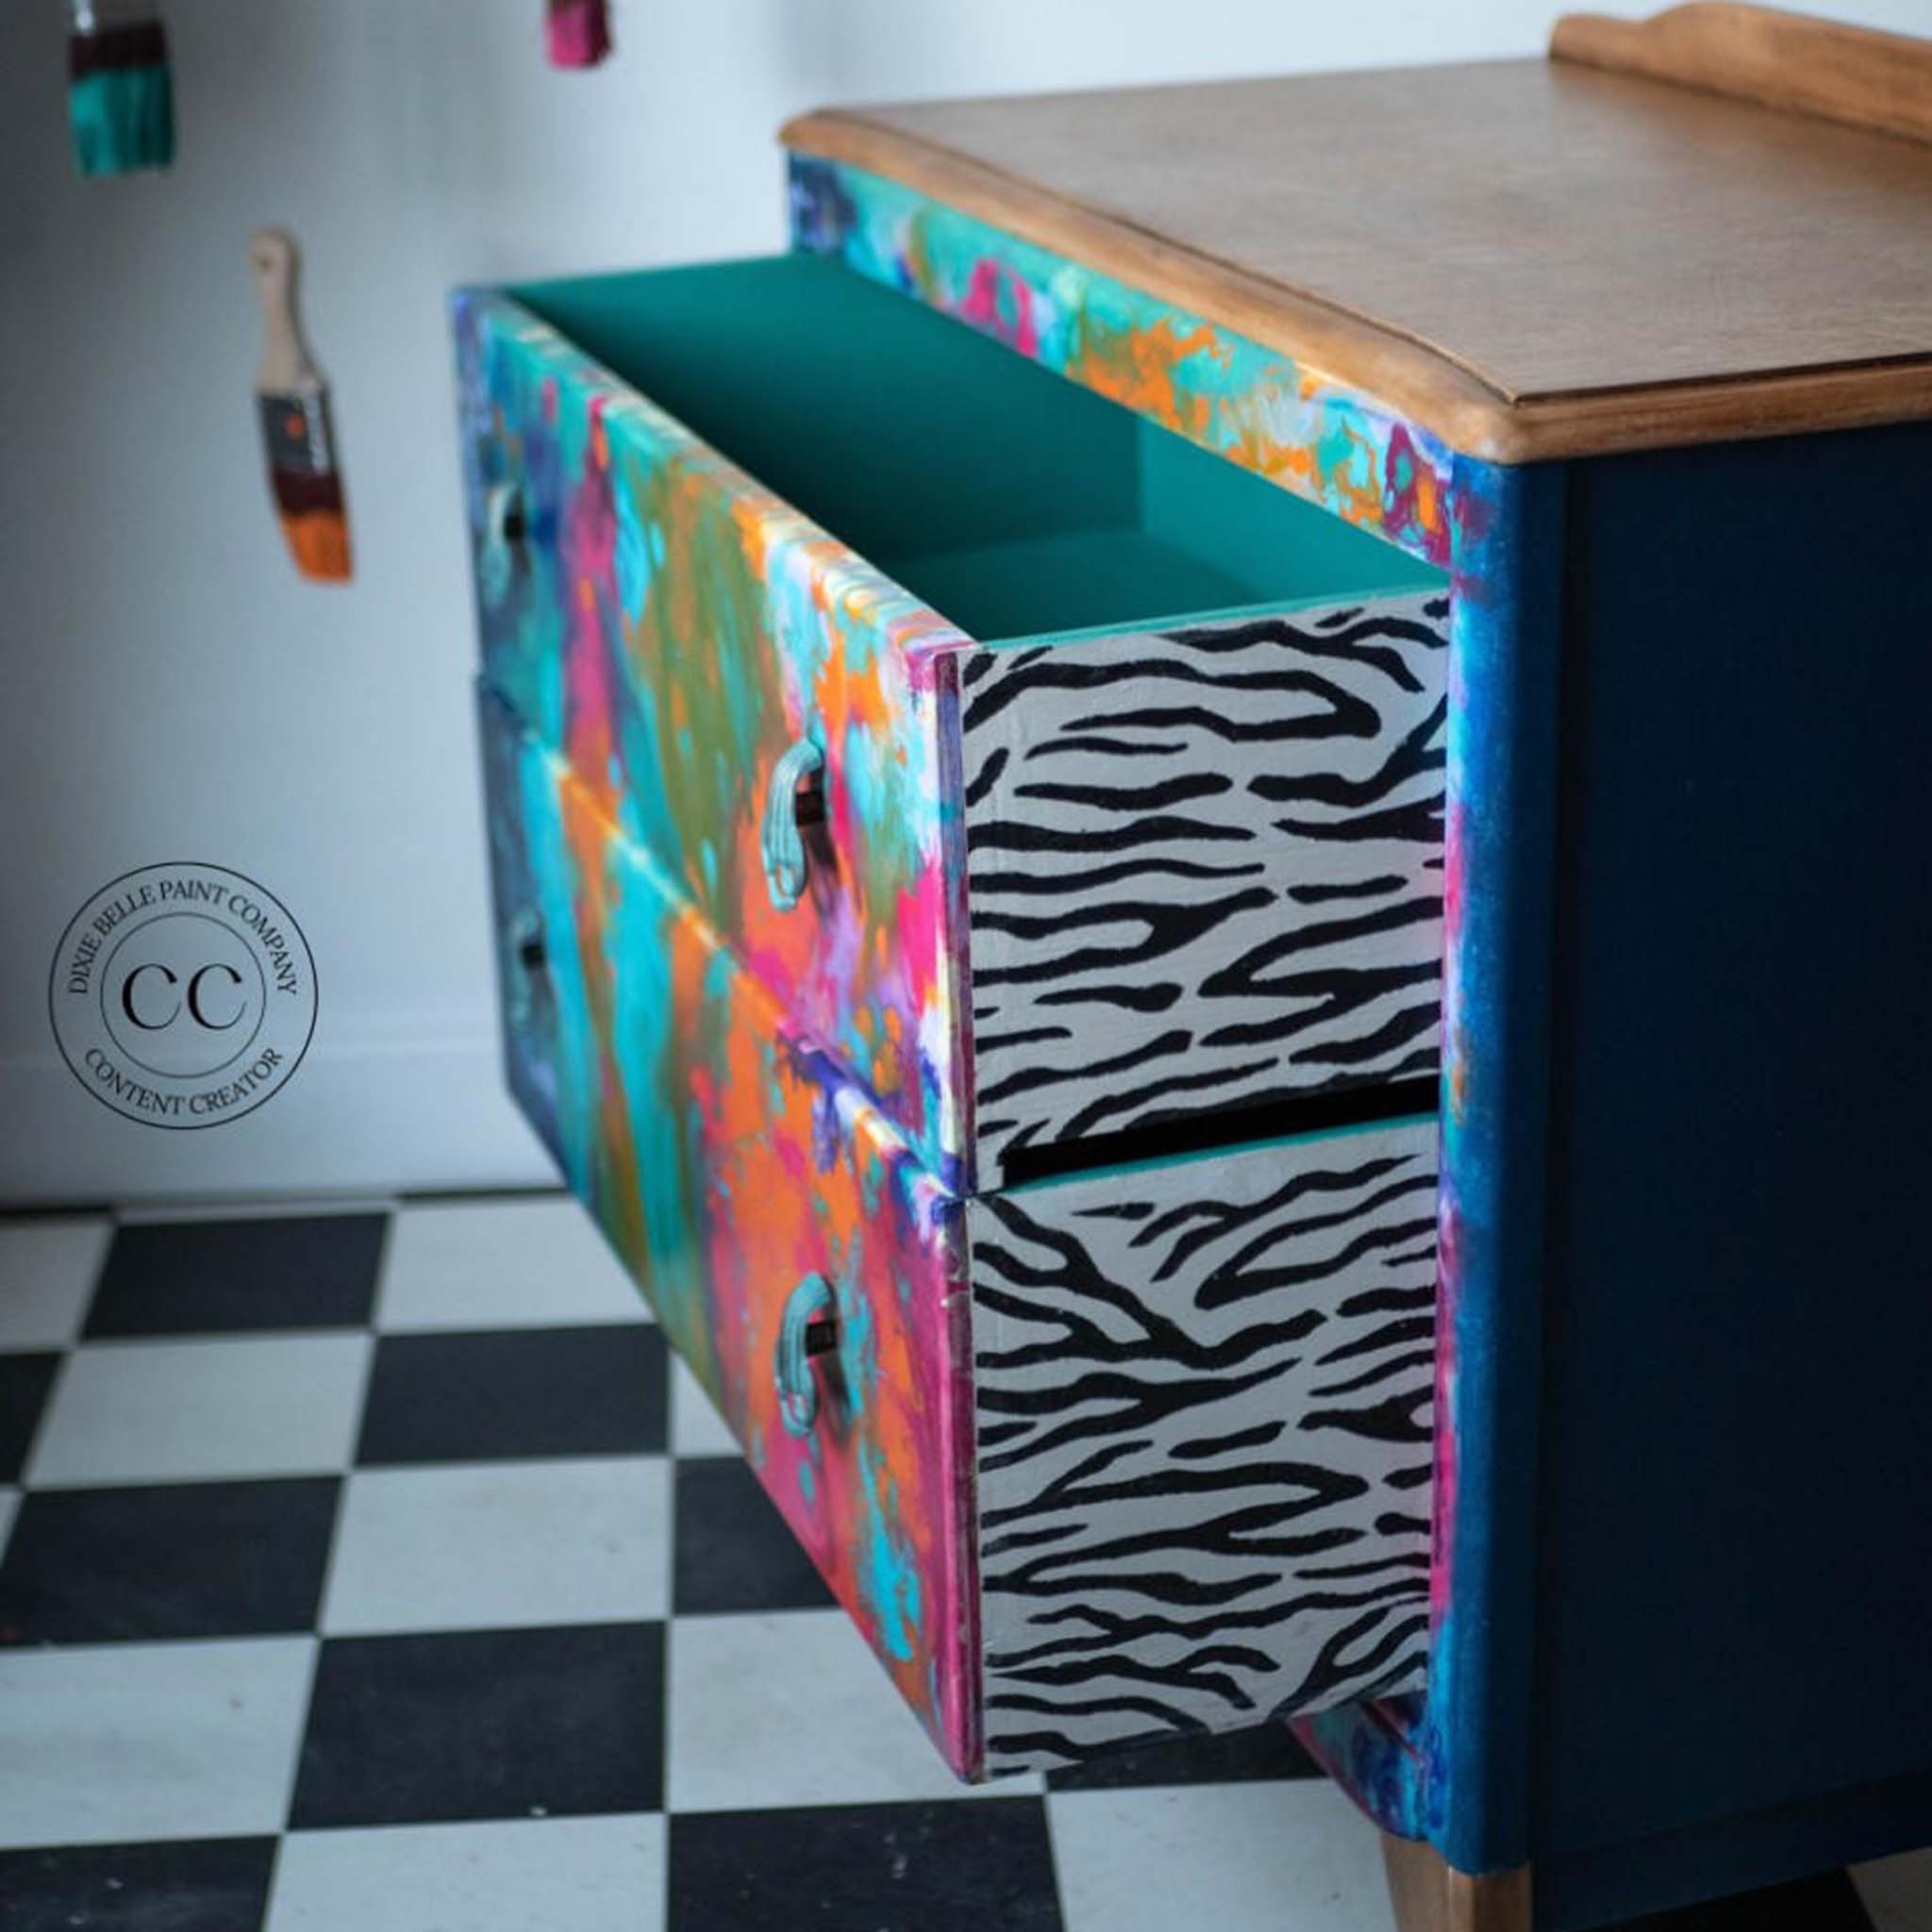 A 2-drawer nightstand is painted blue on the sides, natural wood on top, and artsy colorful paint splatter on the front. The sides of the drawers feature Belles & Whistles Safari mylar stencil zebra pattern in black and white.